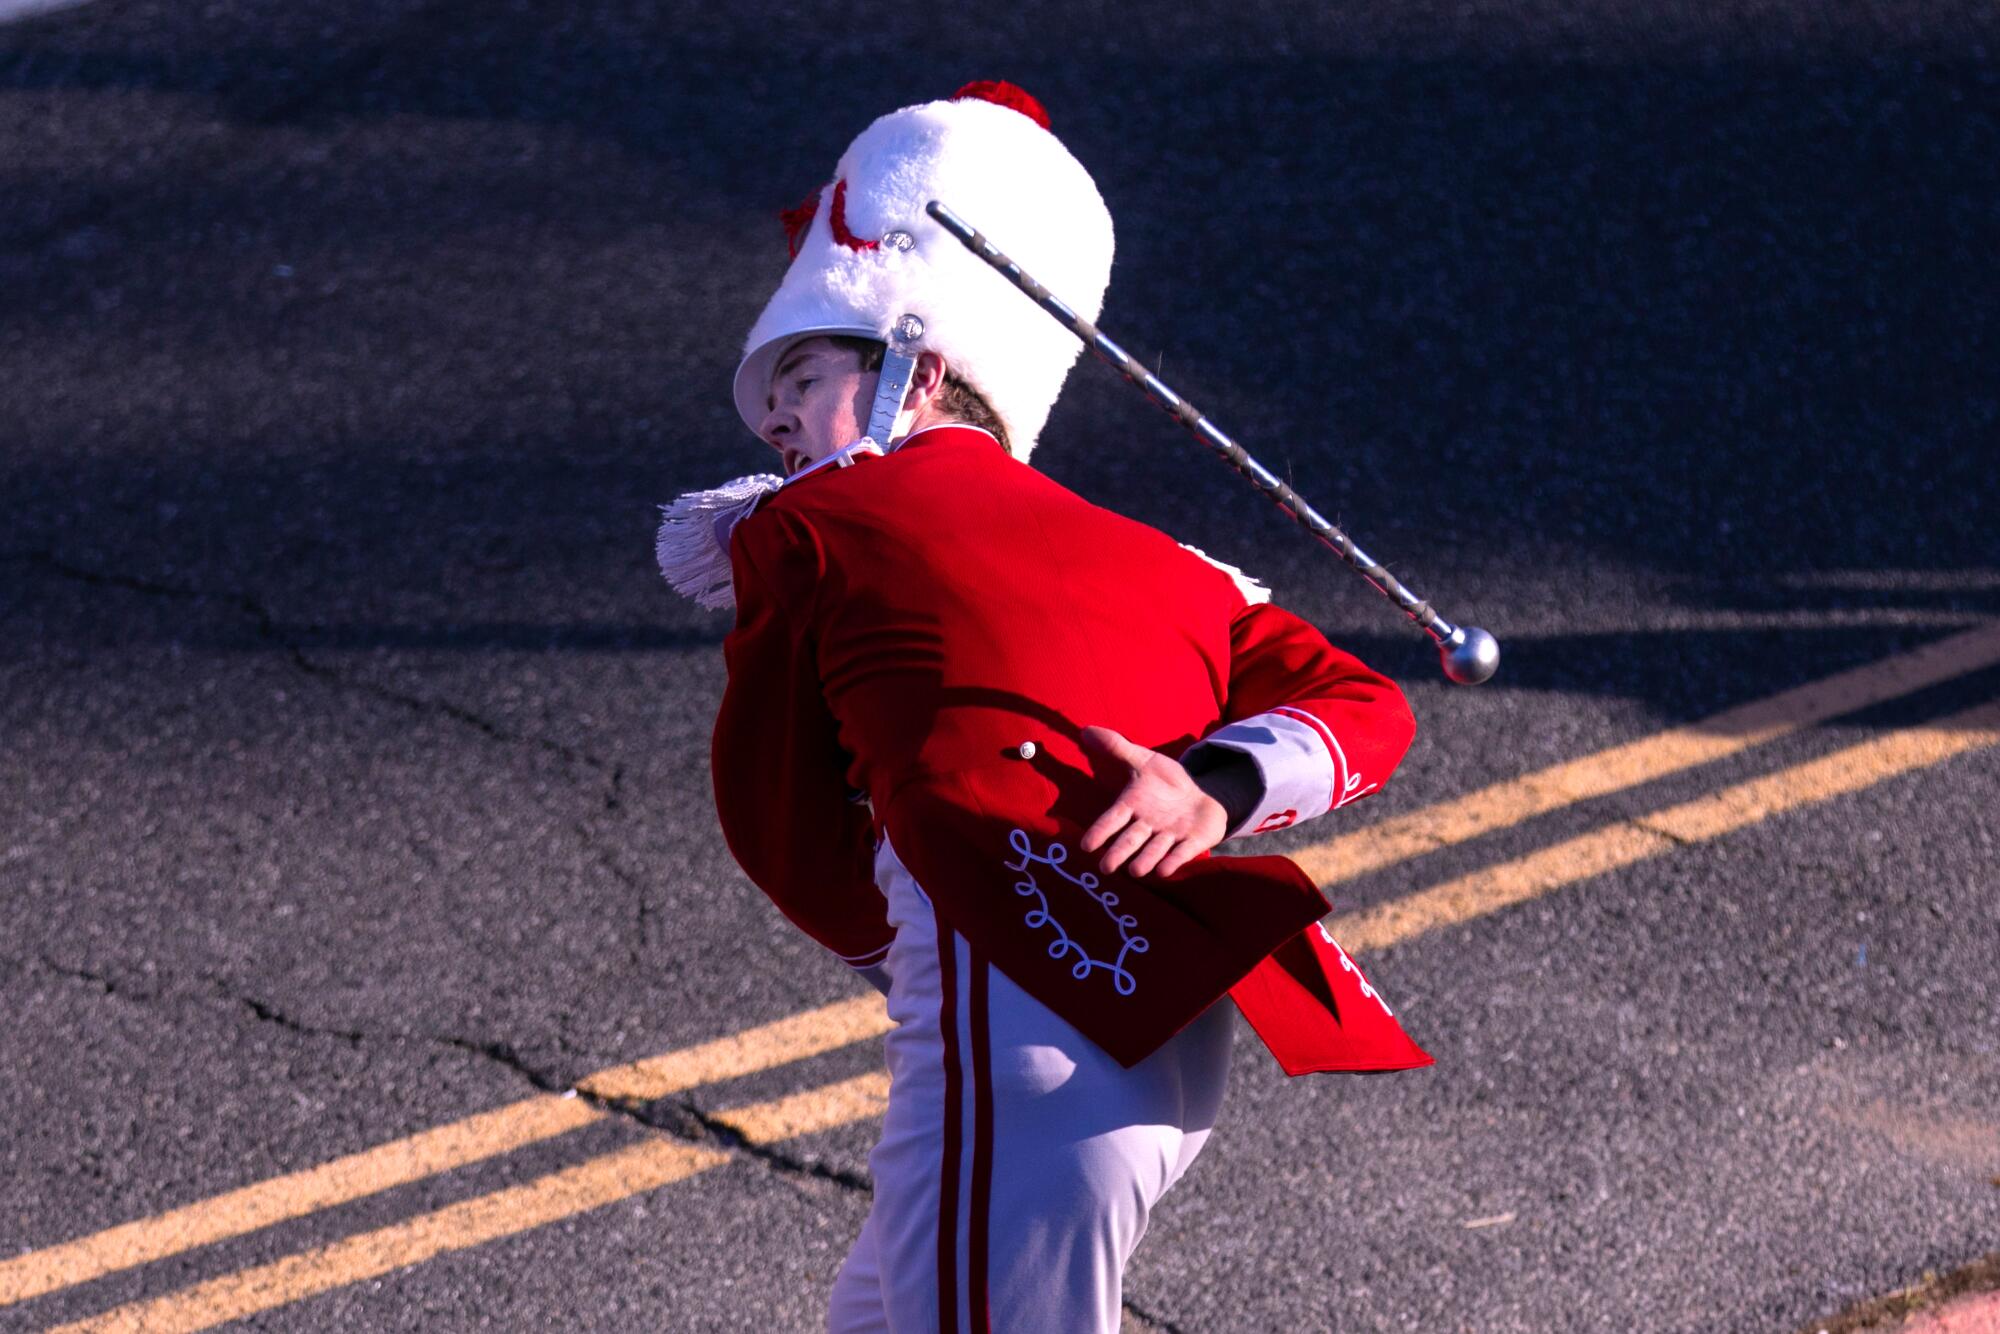 A baton twirler with the Ohio State University marching band.